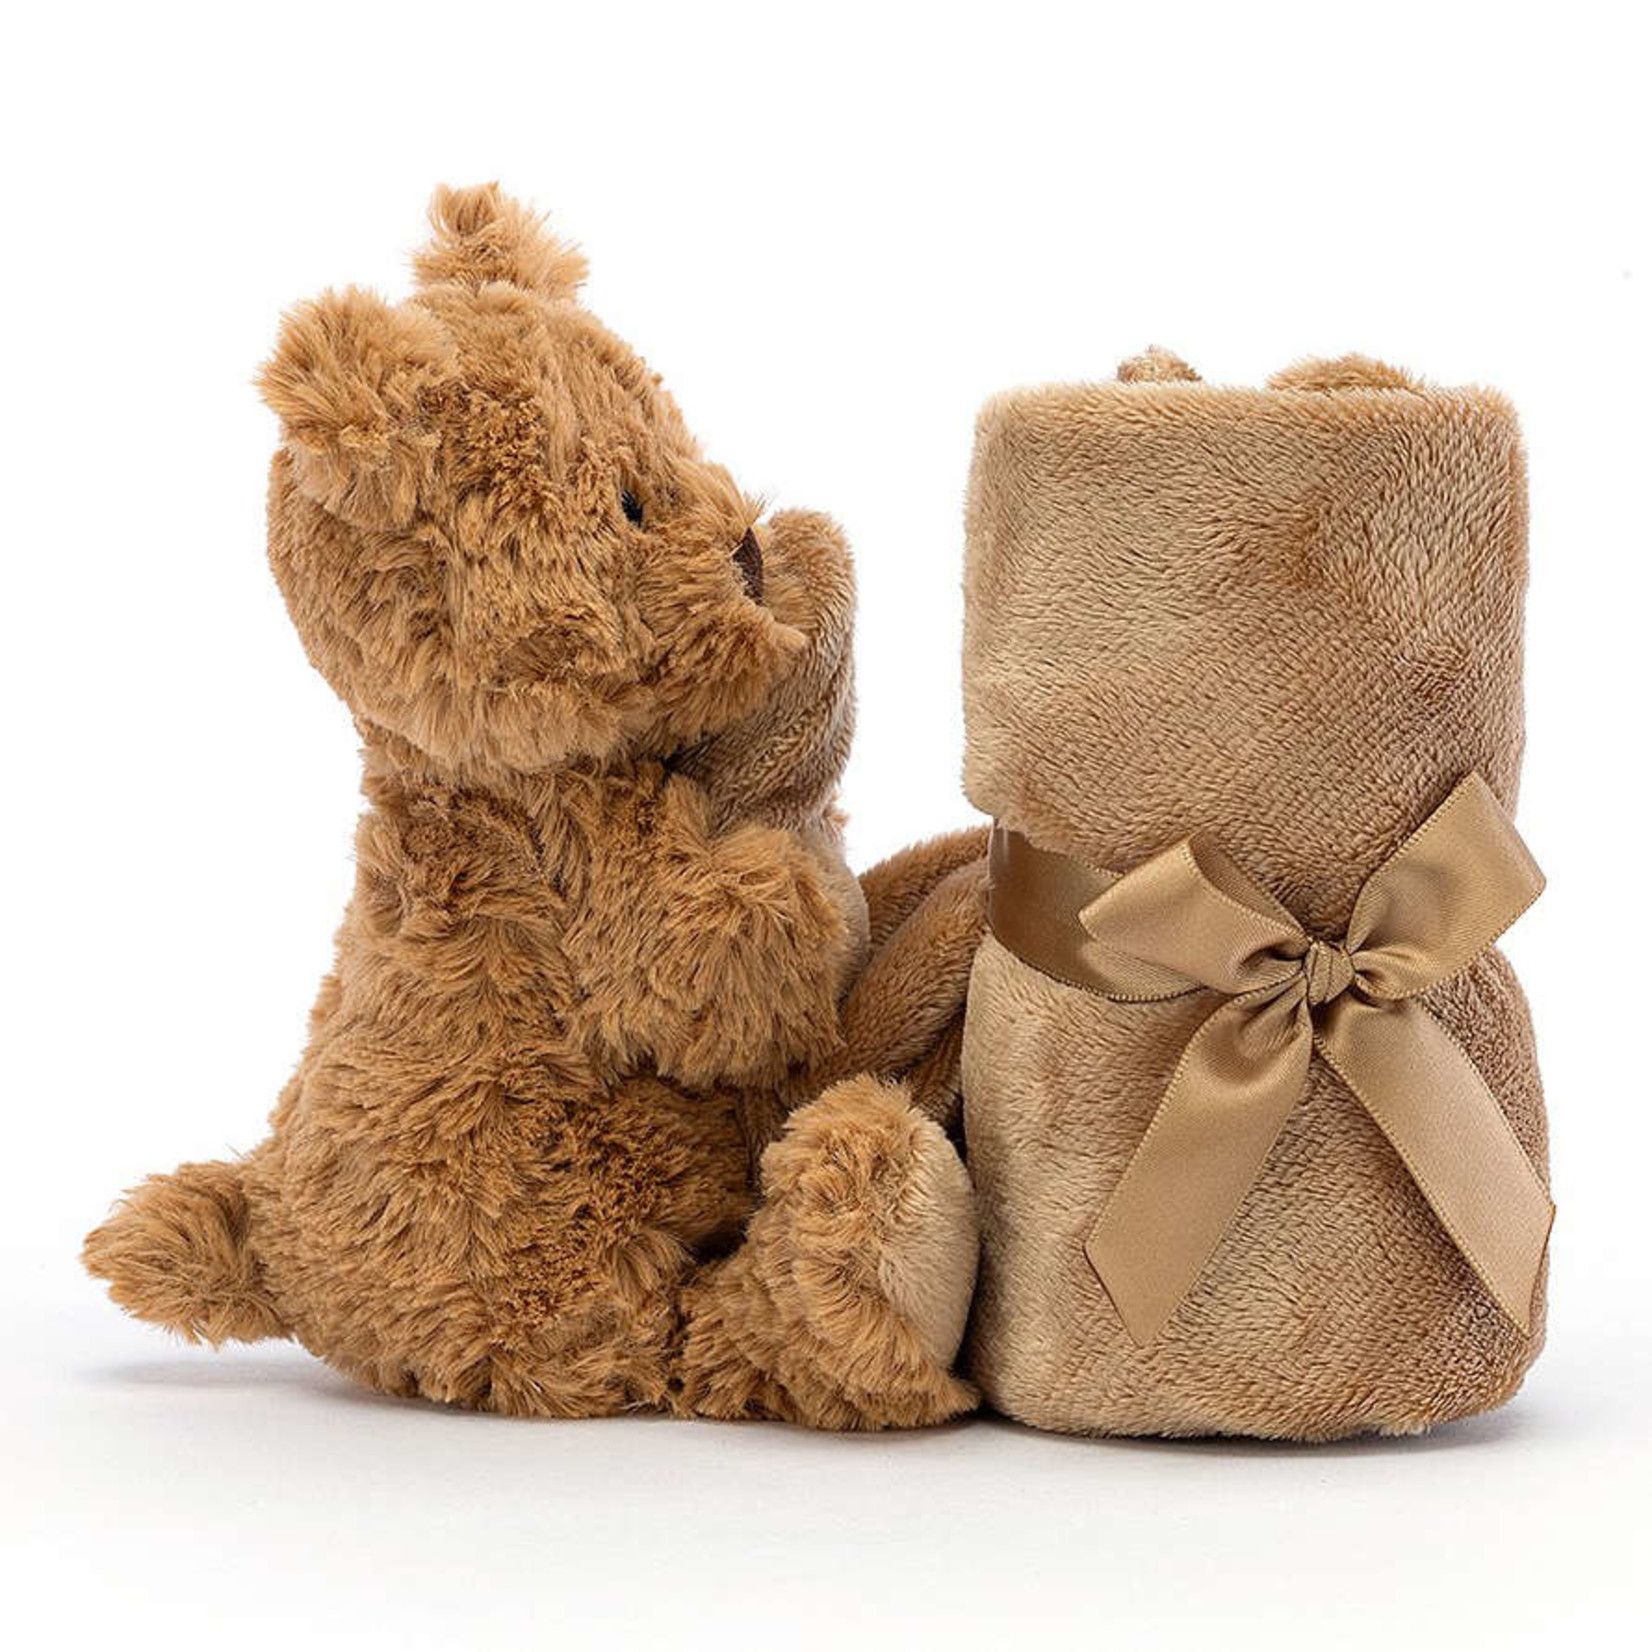 JELLYCAT BARTHOLOMEW BEAR SOOTHER